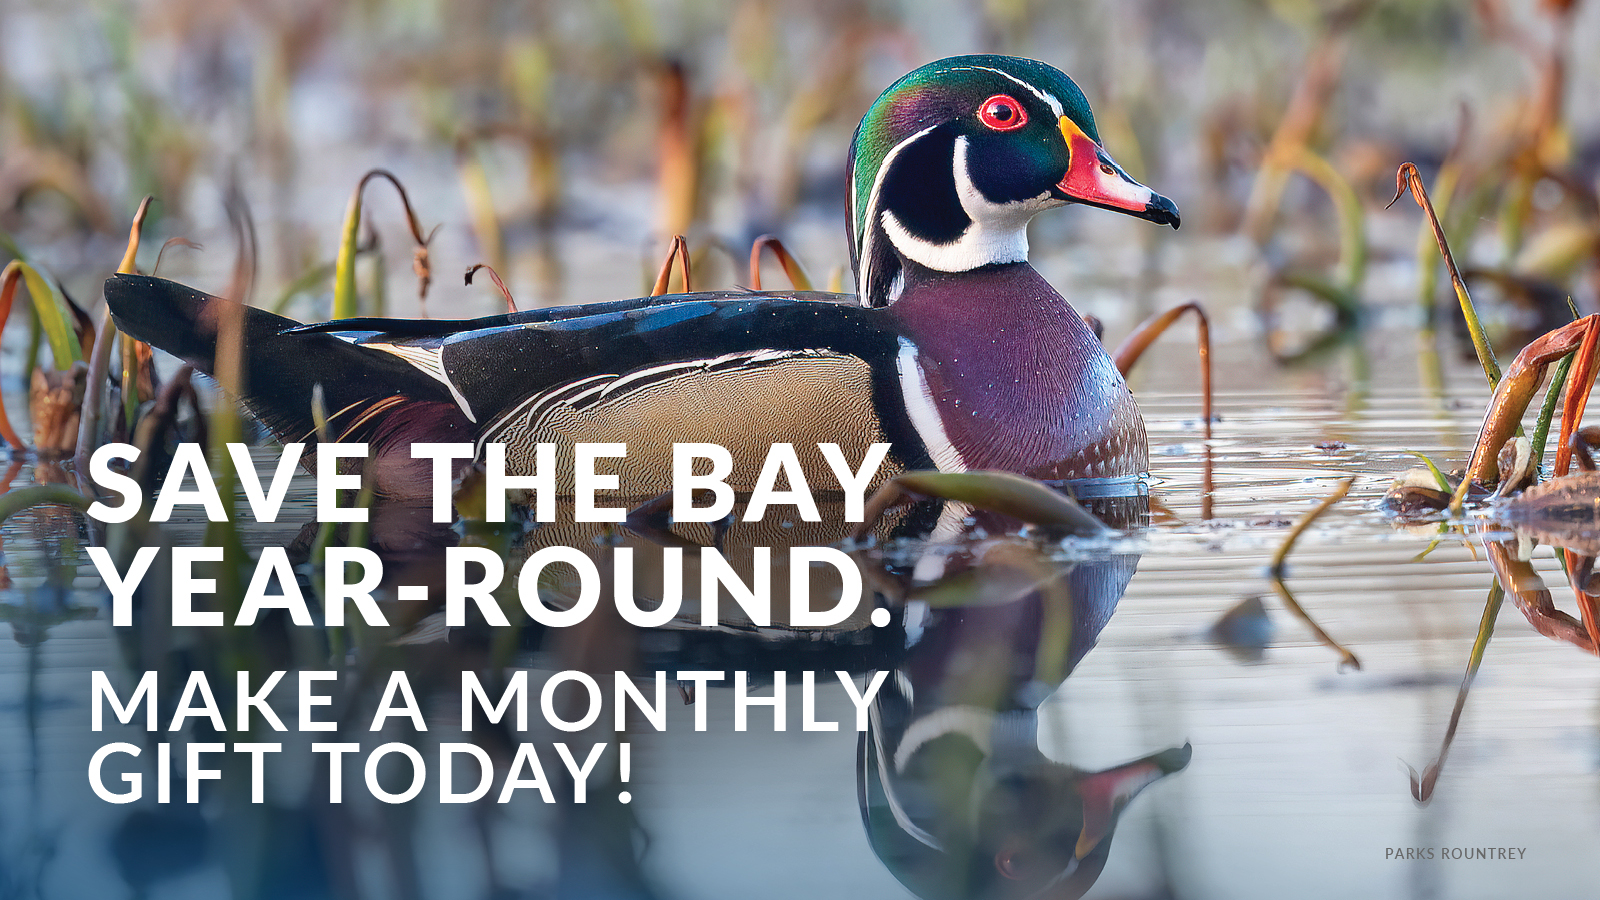 Save the Bay year-round. Make a monthly gift today! (Photo Credit: Parks Rountrey)